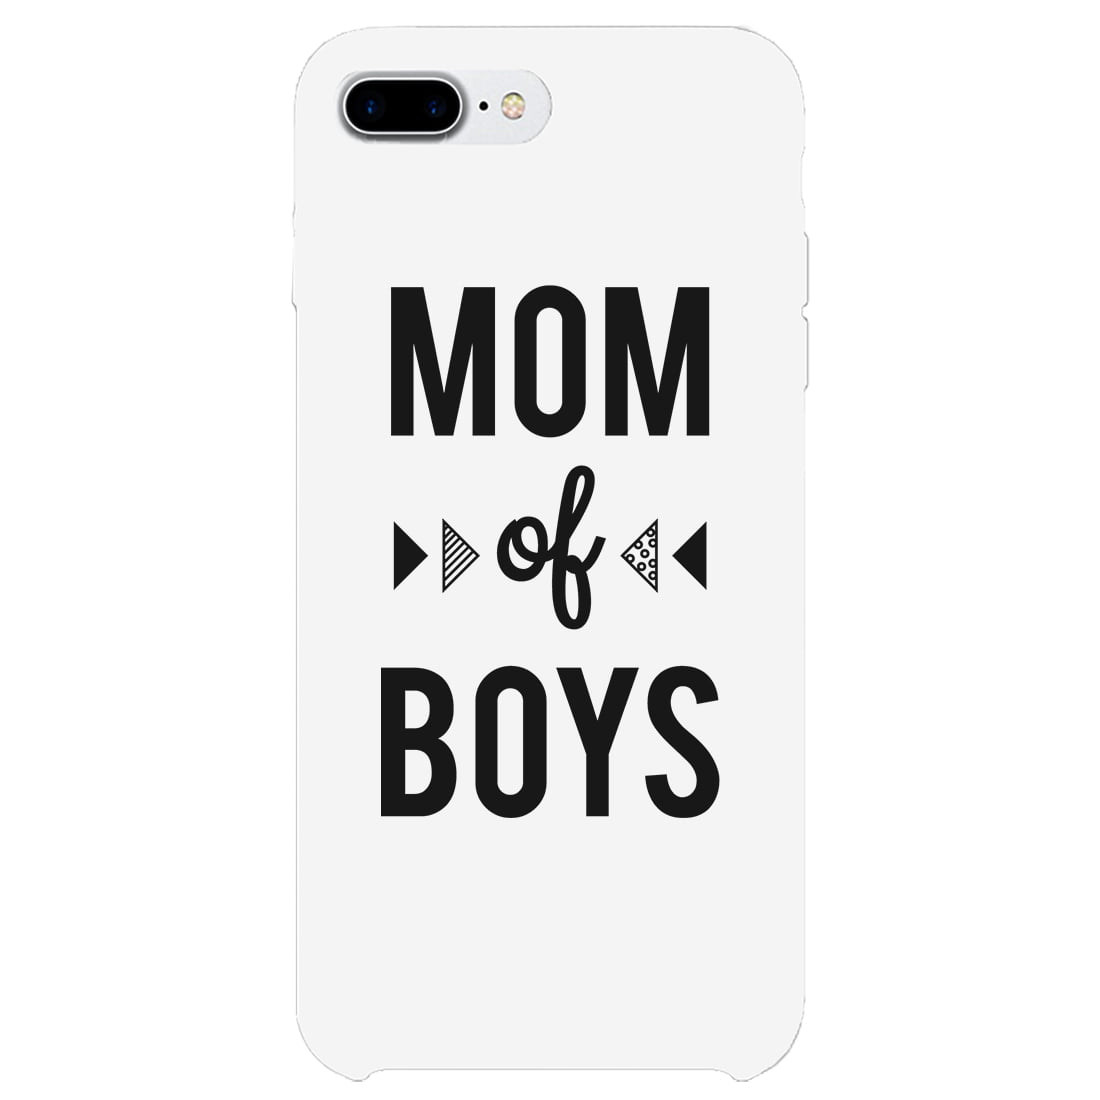 Mom Of Boys Phone Case White Slim Fit Personalized Mothers Day Gift